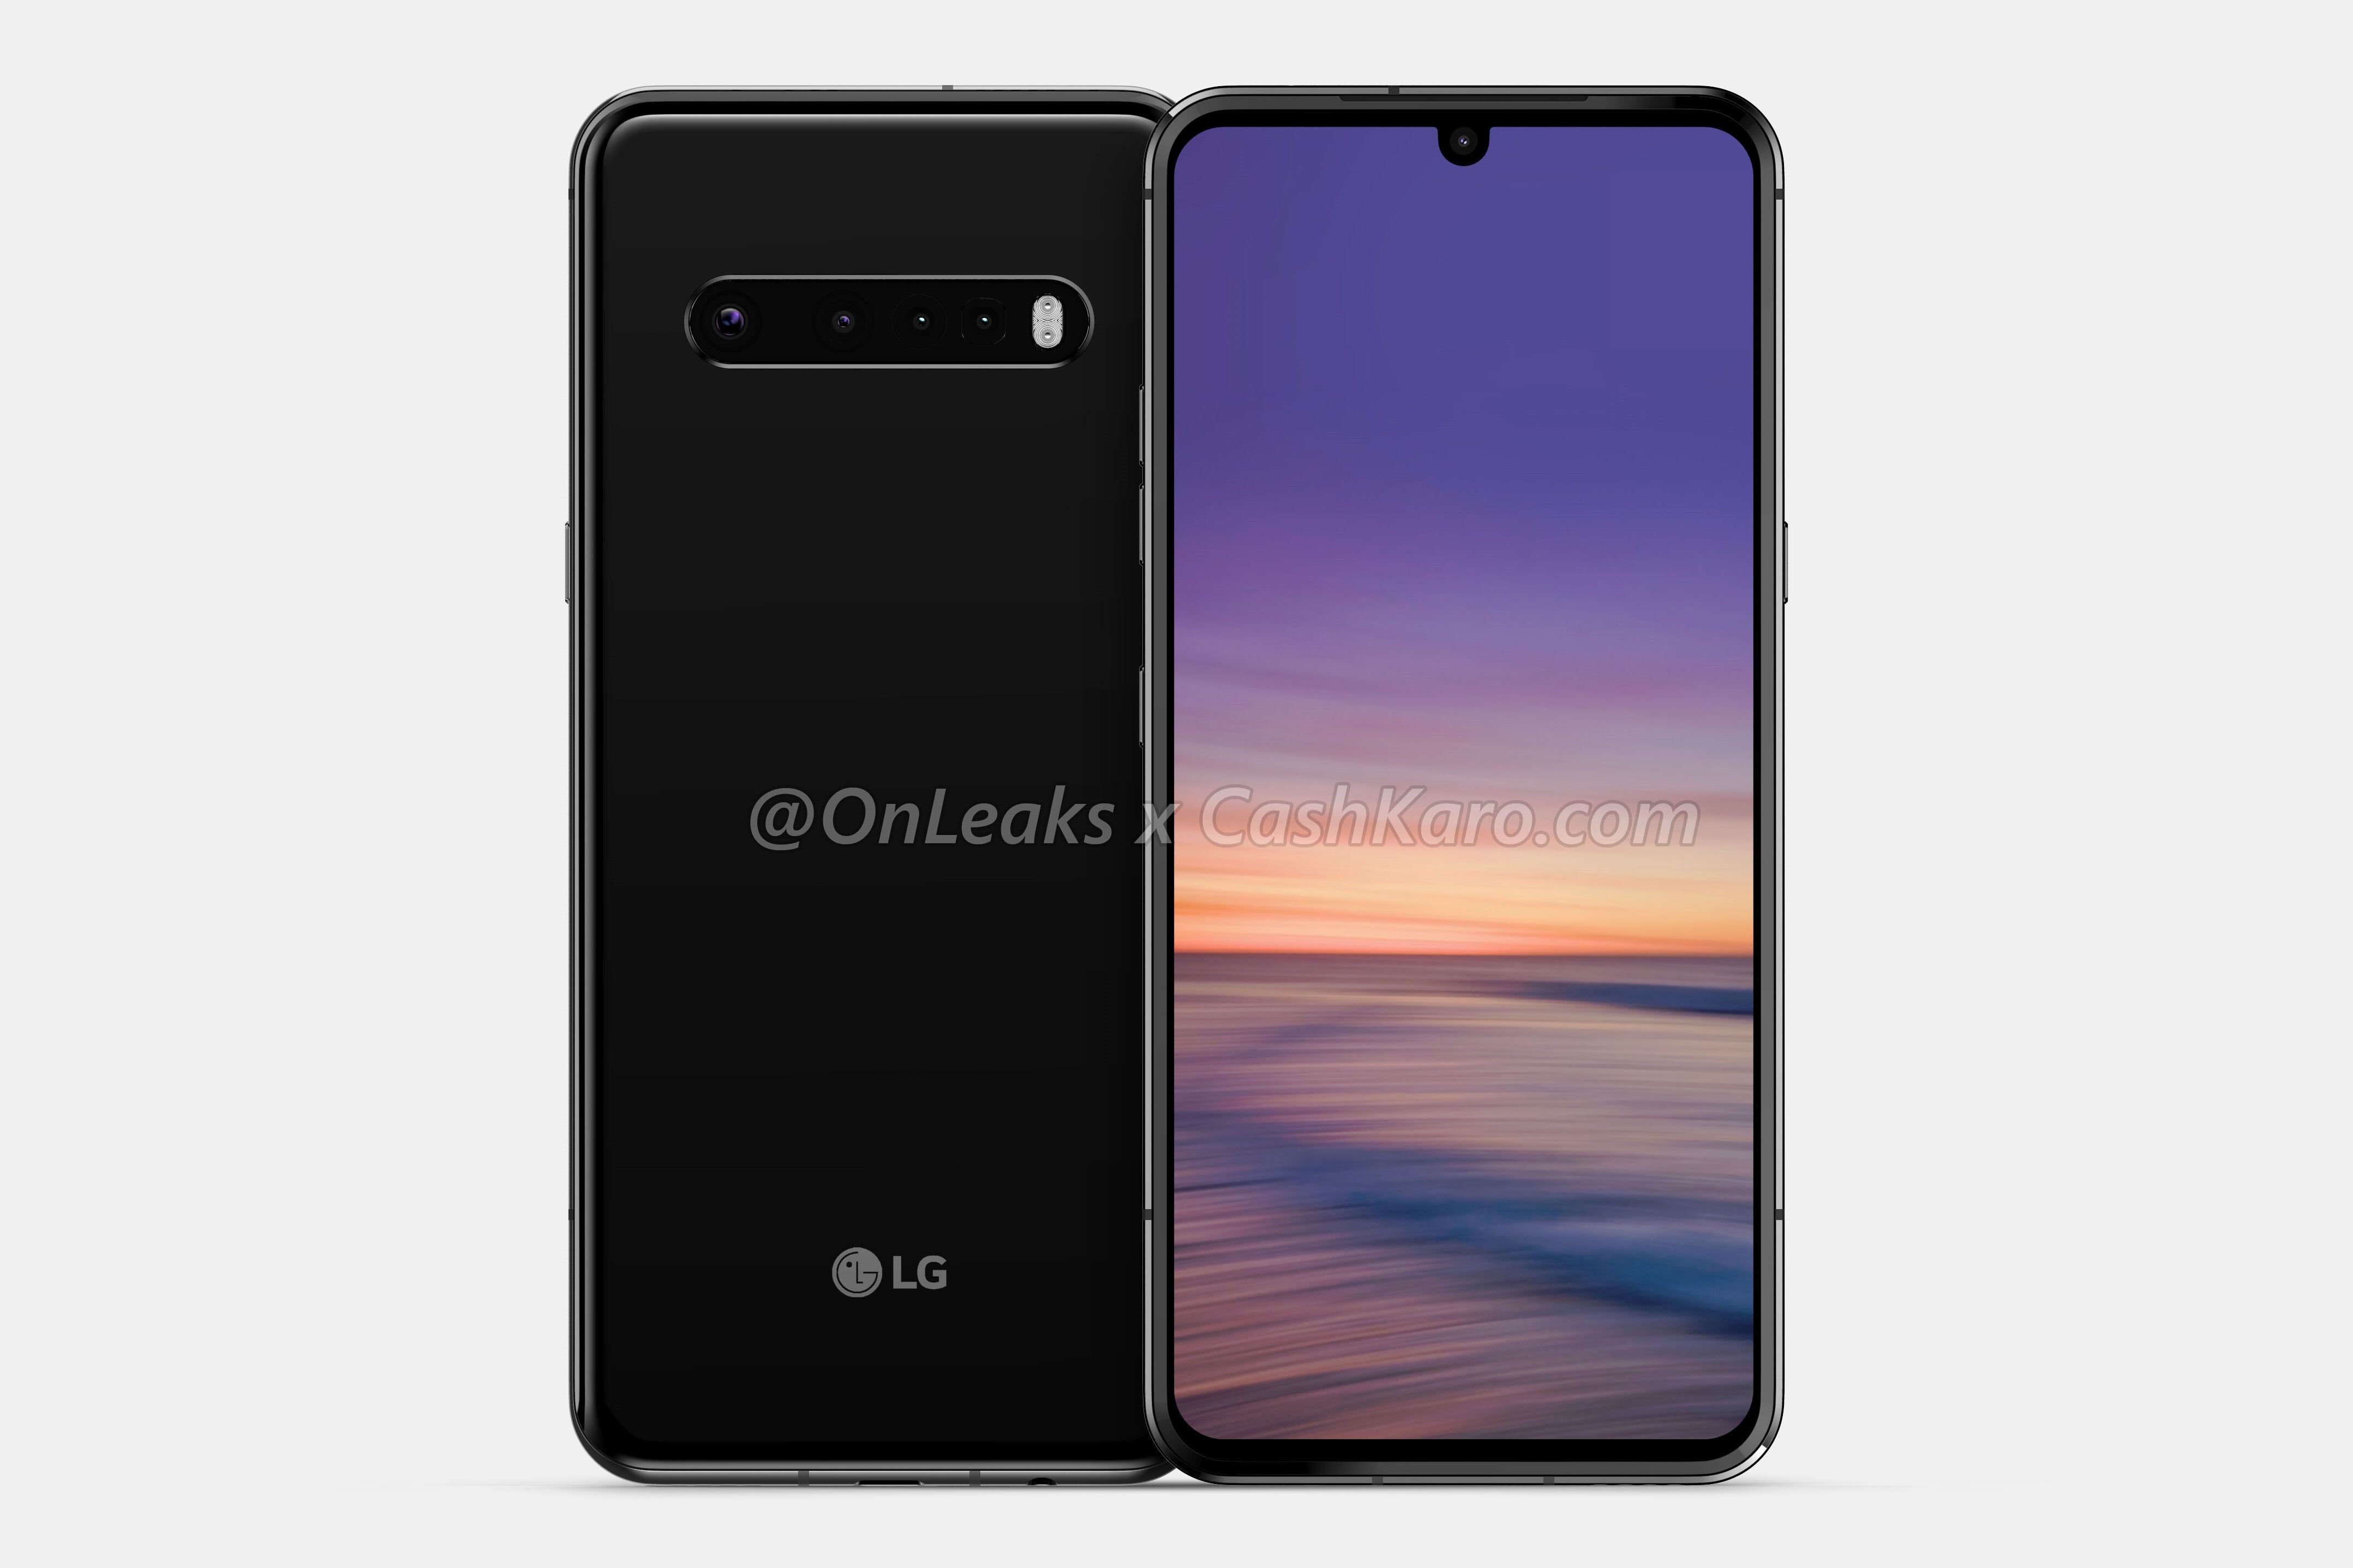 LG vows to make smartphone business profitable in 2021 with "wow factor"